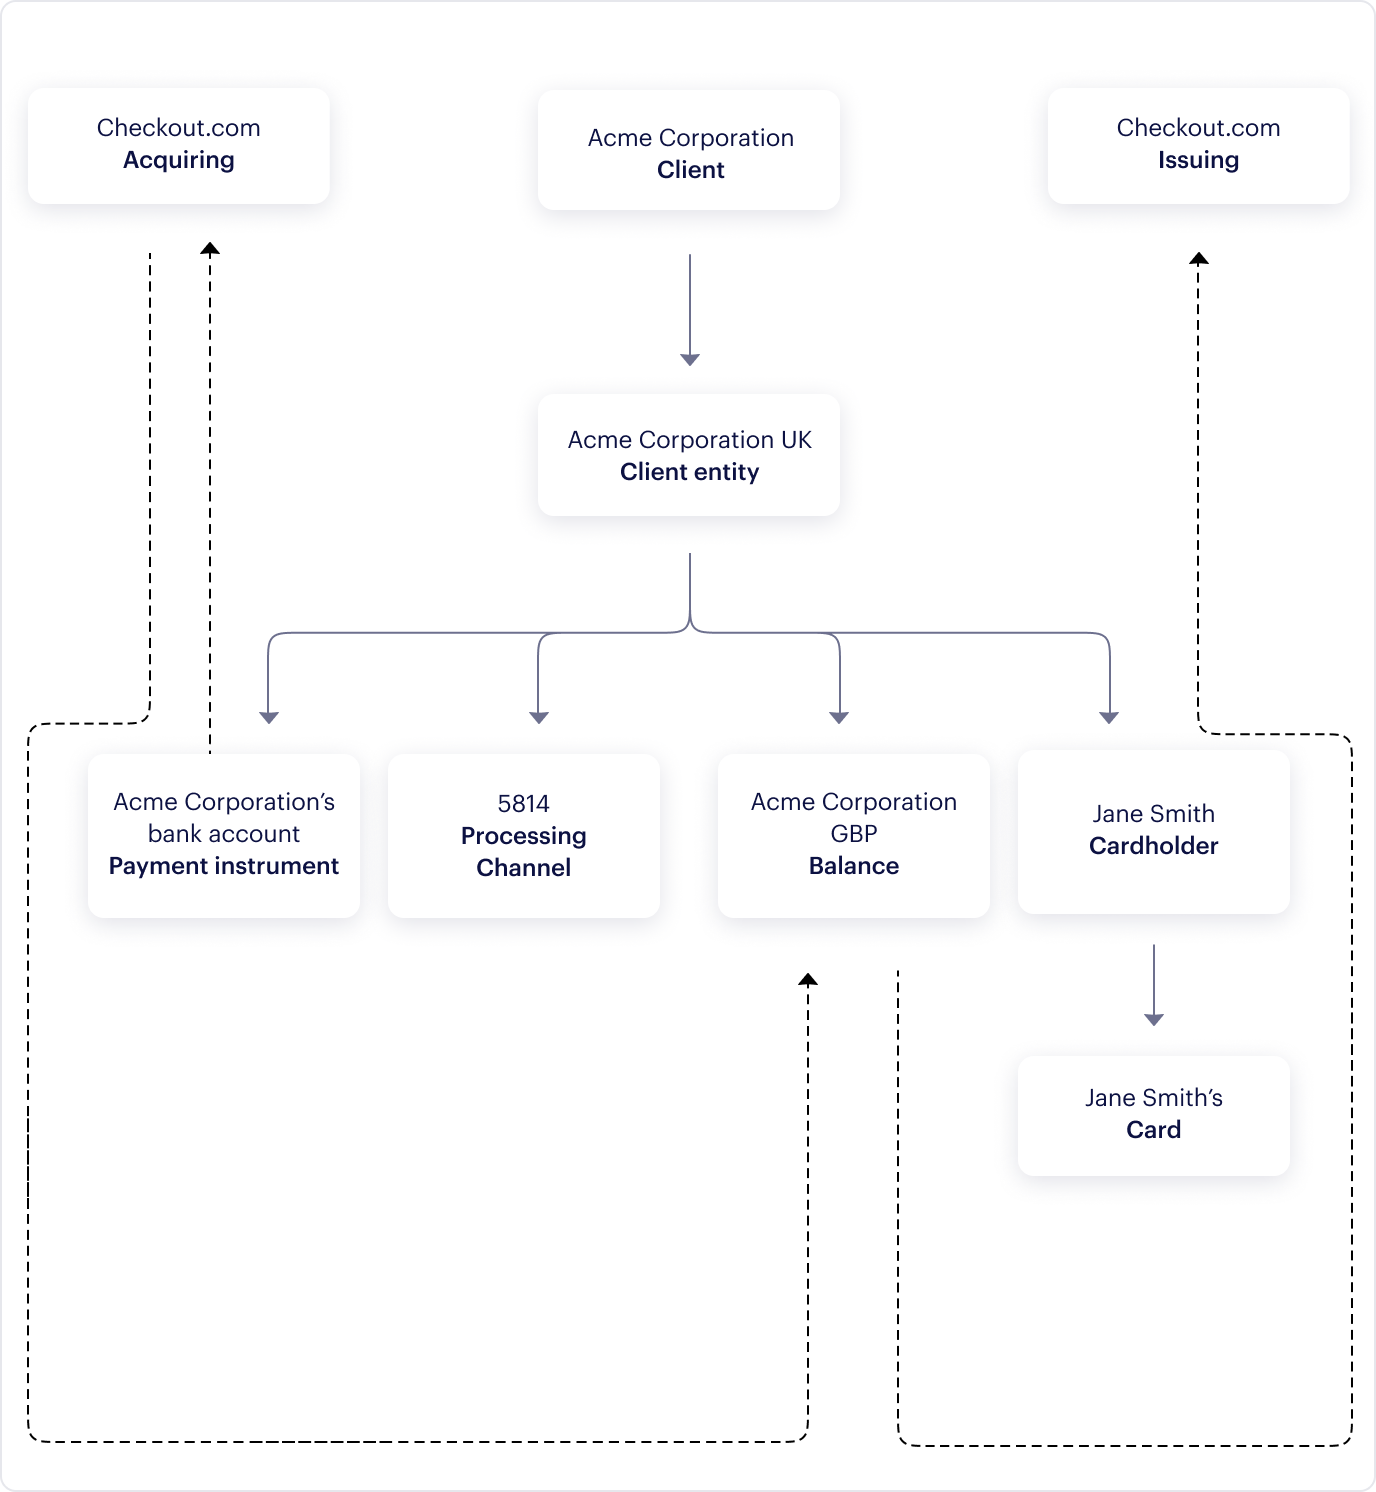 Flowchart showing the setup for a joint issuing and acquiring model